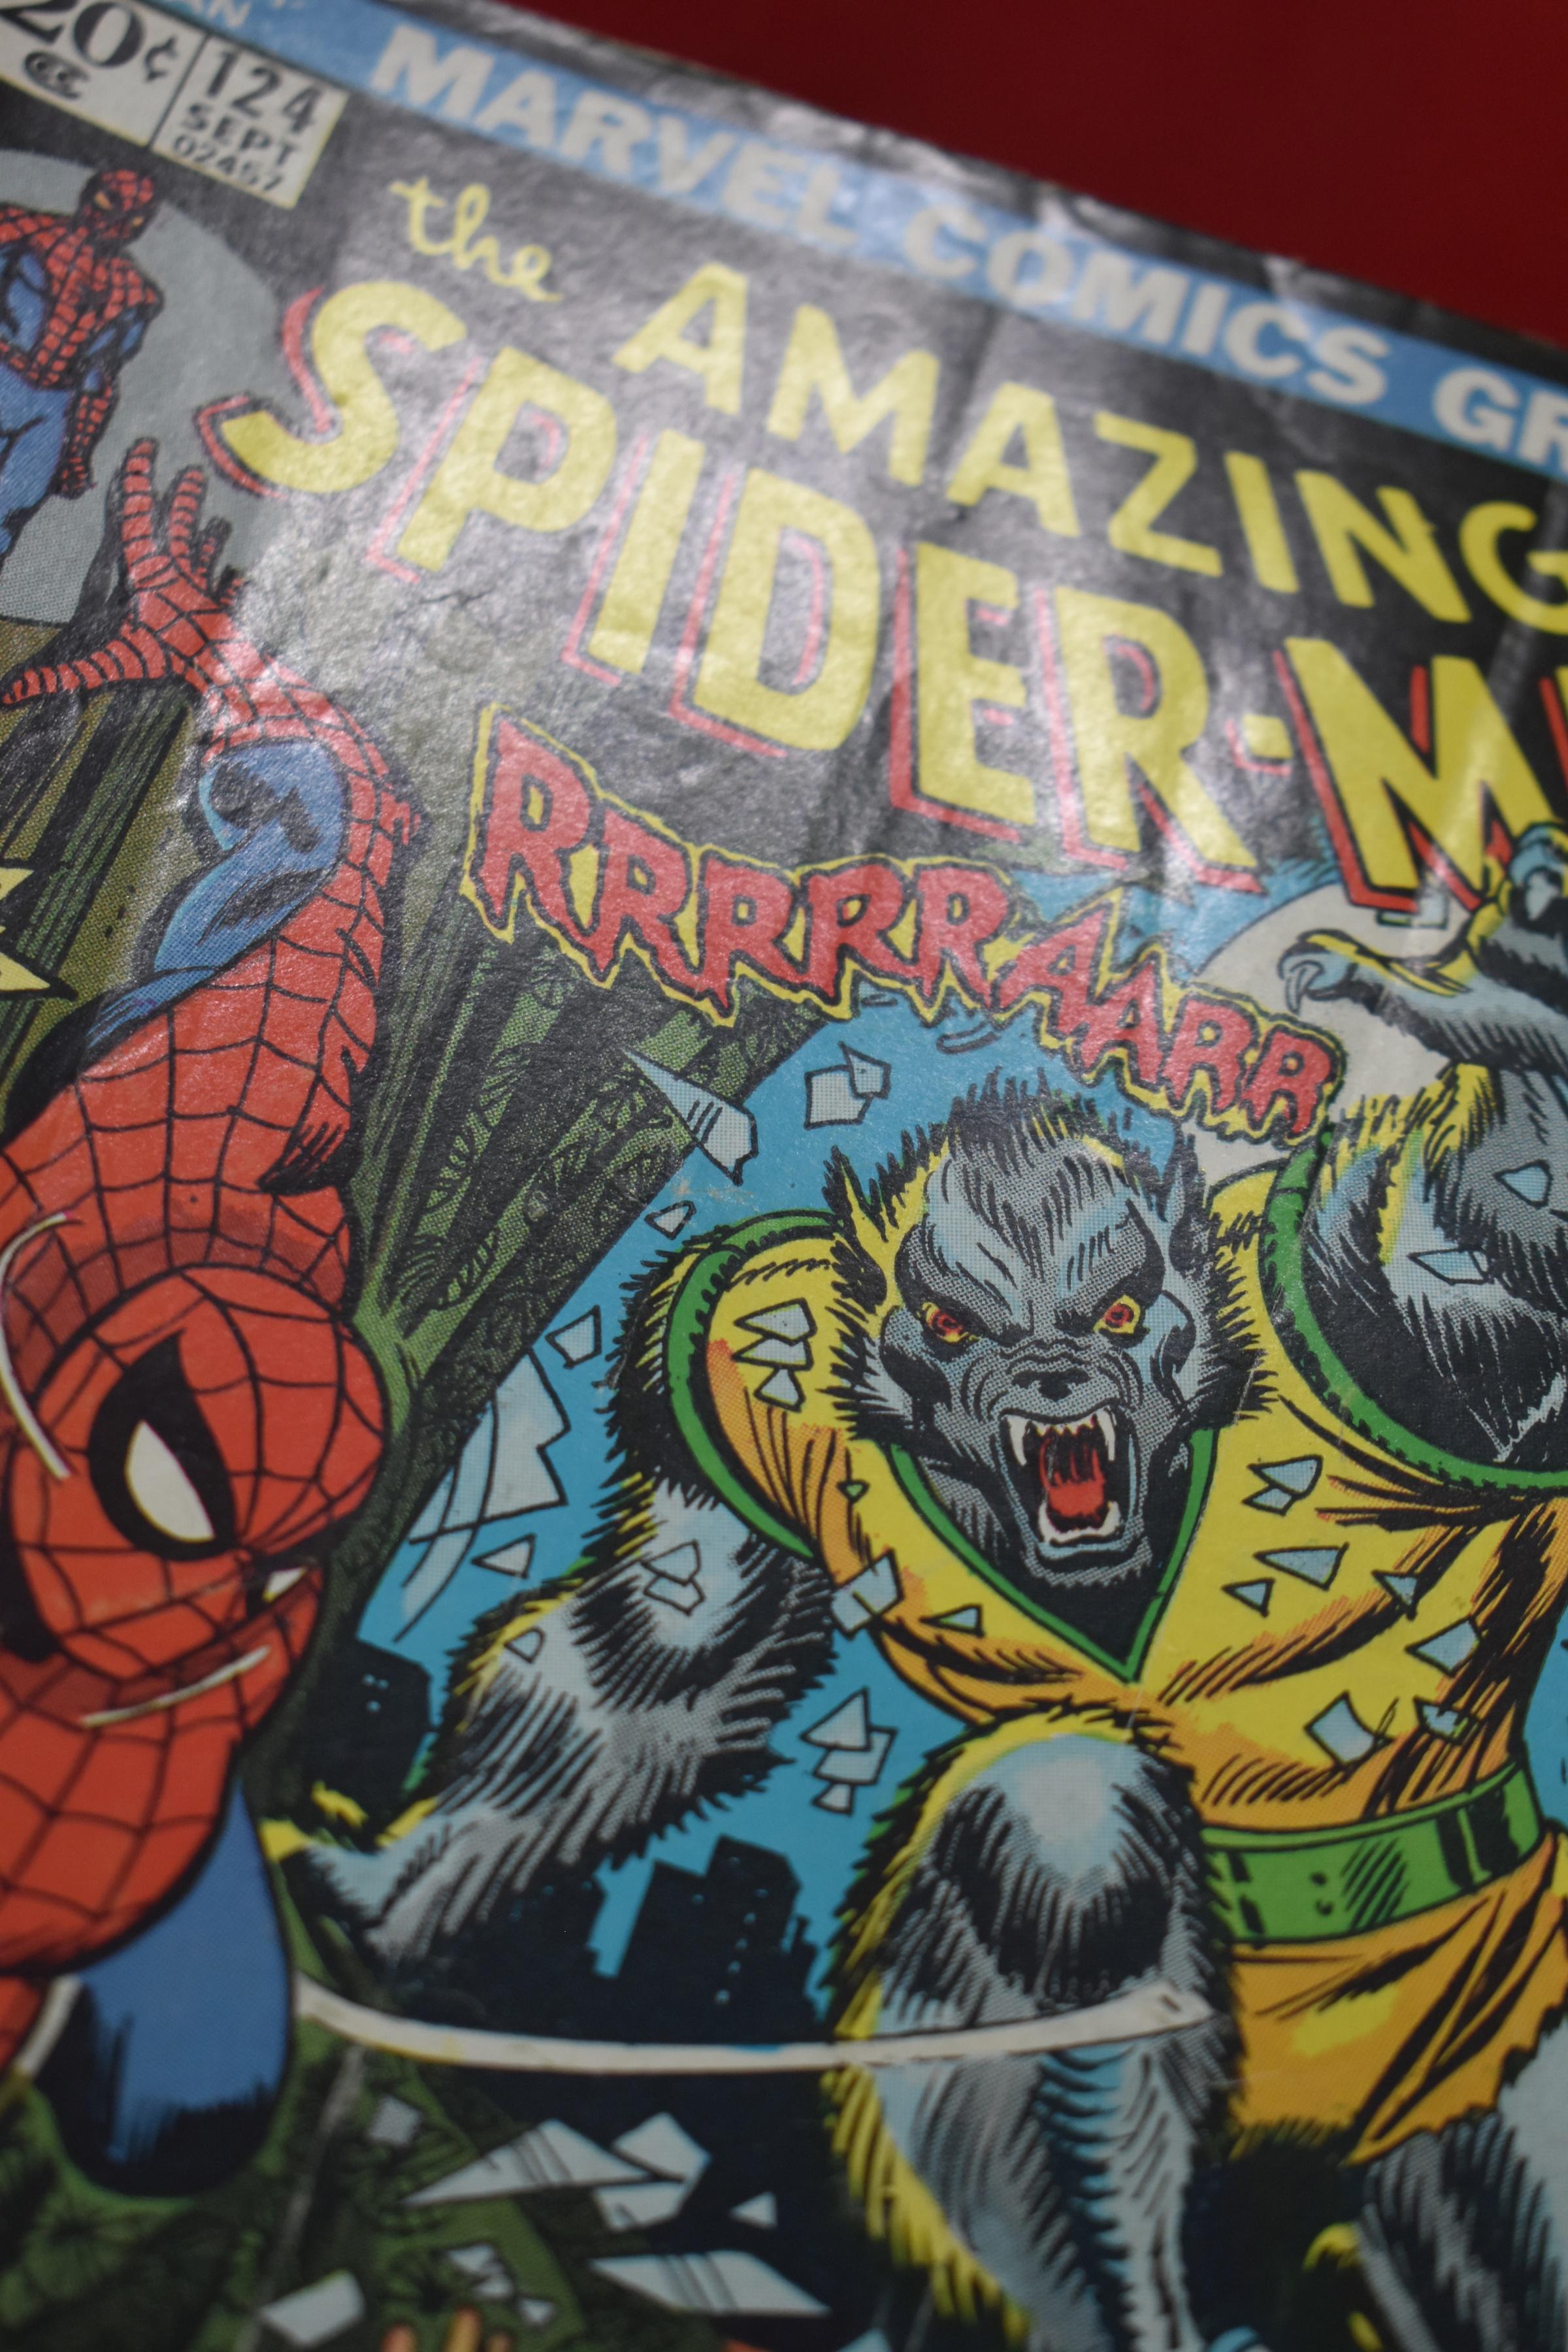 AMAZING SPIDERMAN #124 | KEY 1ST APPEARANCE OF MAN-WOLF! | *STAPLES SOLID - SOME CREASING*